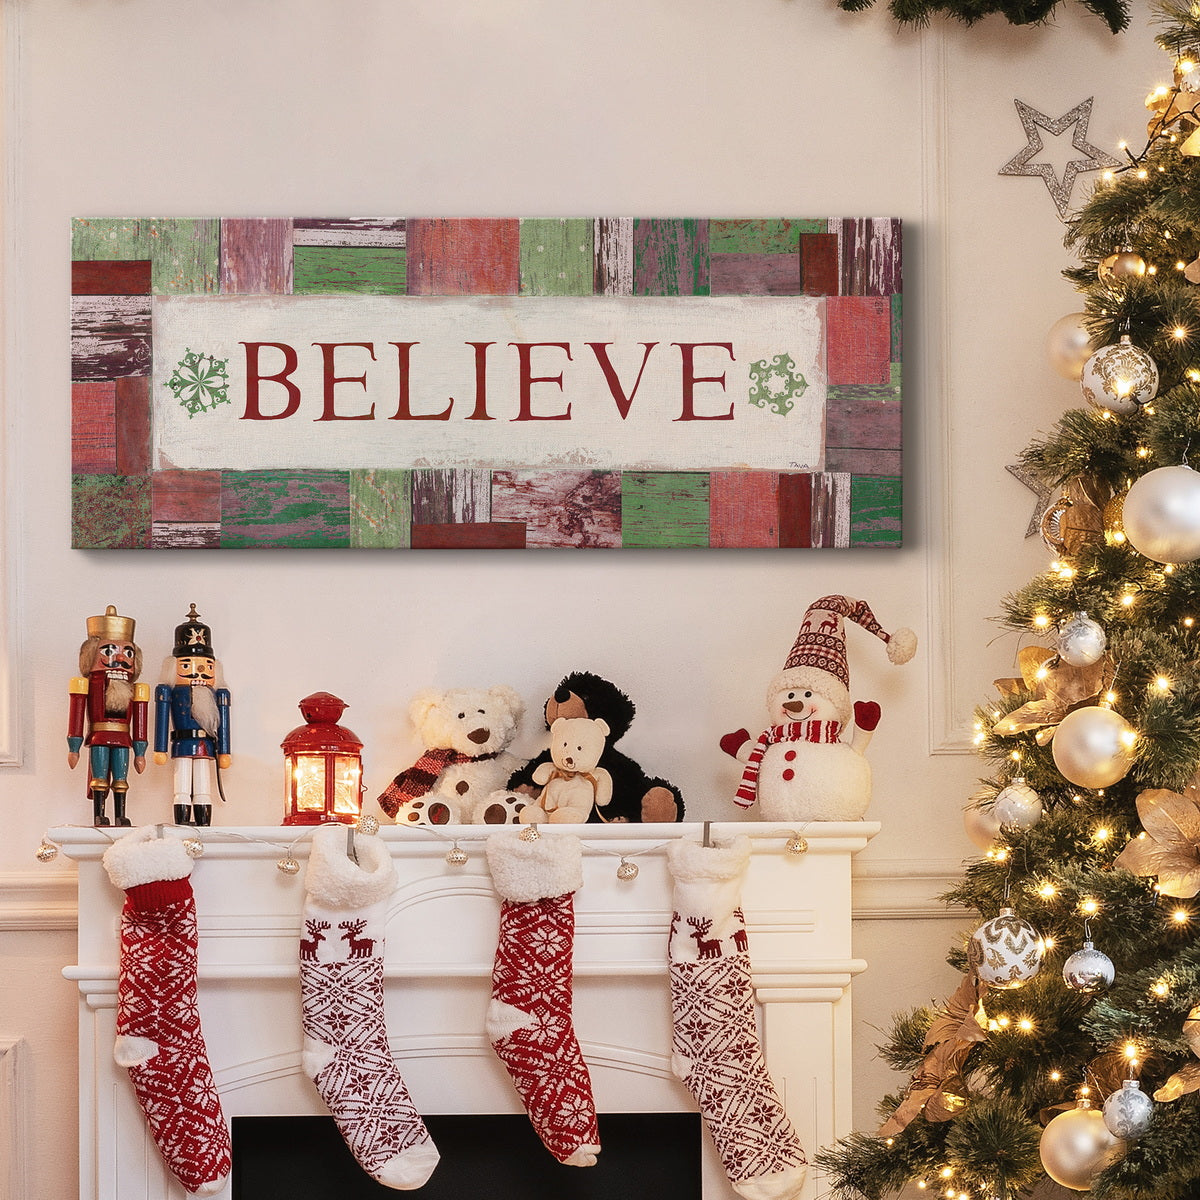 Believe Premium Gallery Wrapped Canvas - Ready to Hang